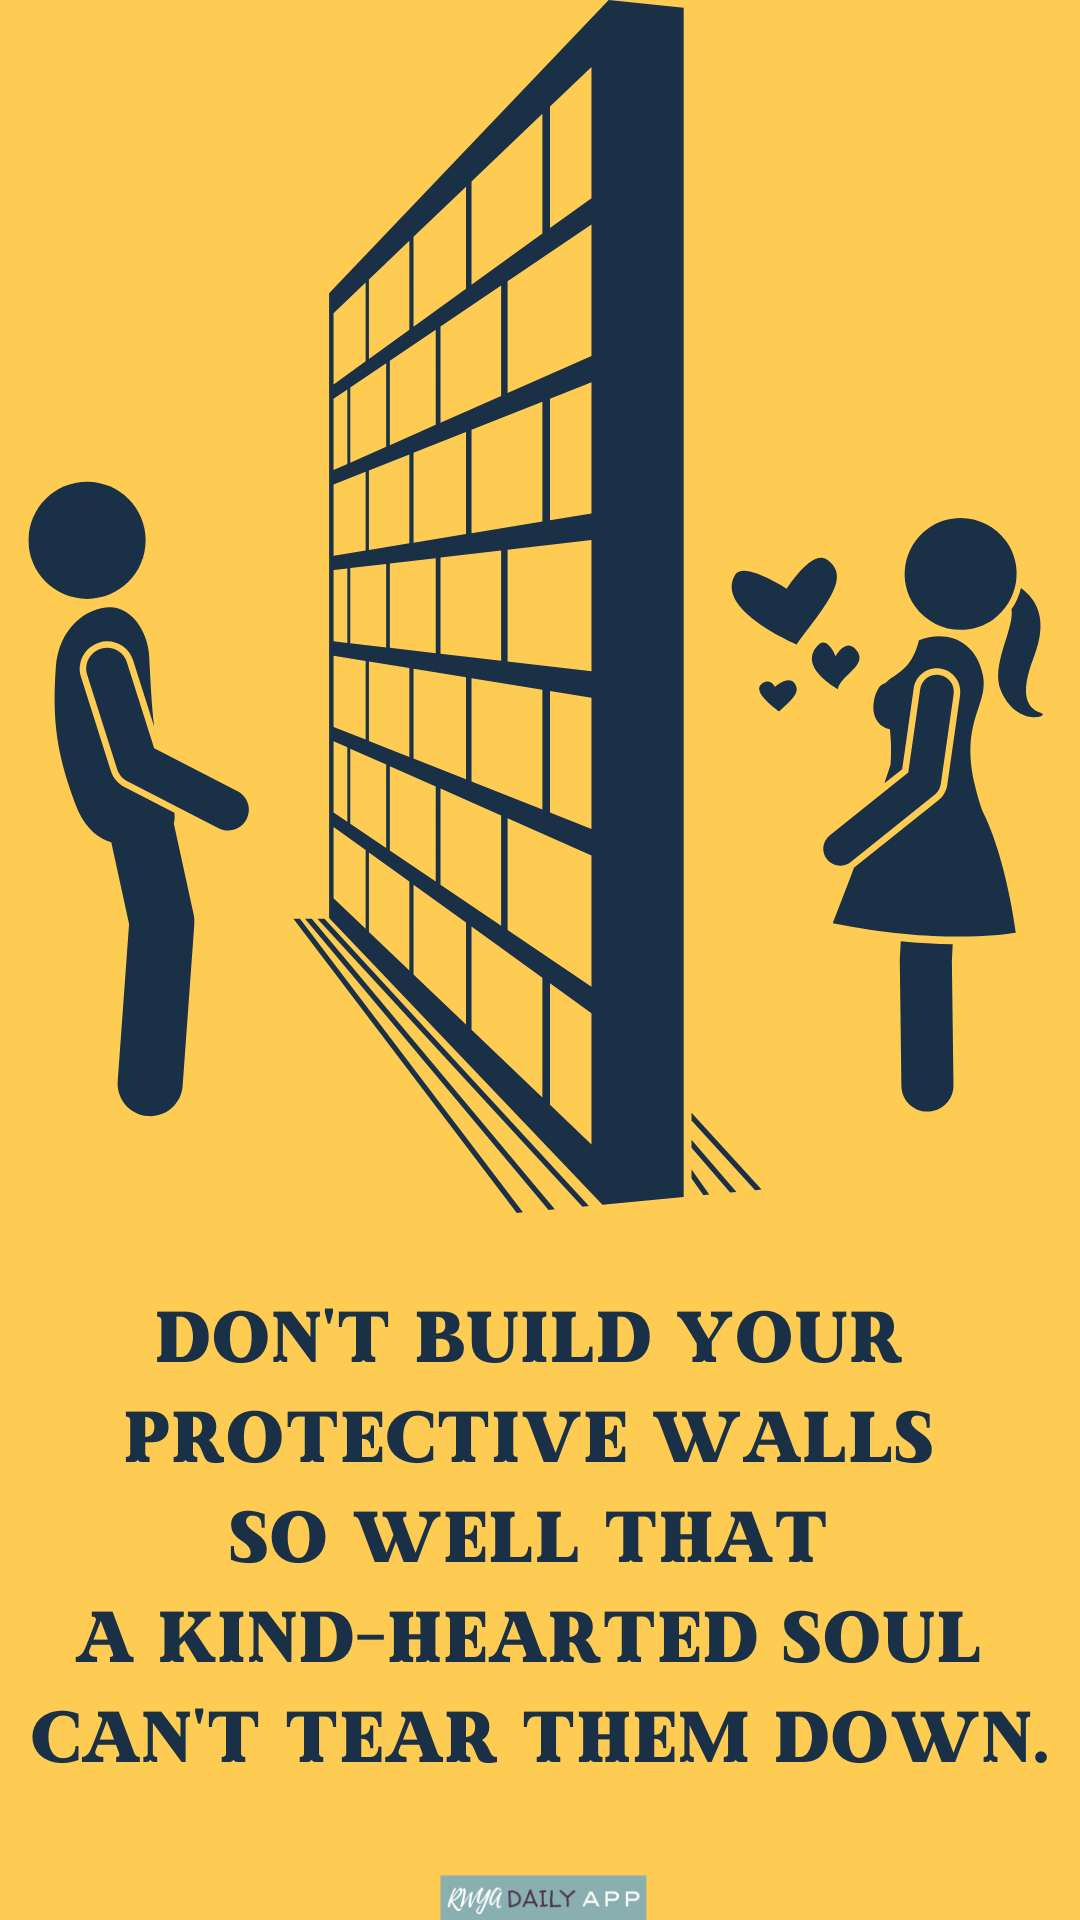 Don't build your protective walls so well that a kind-hearted soul can't tear them down.